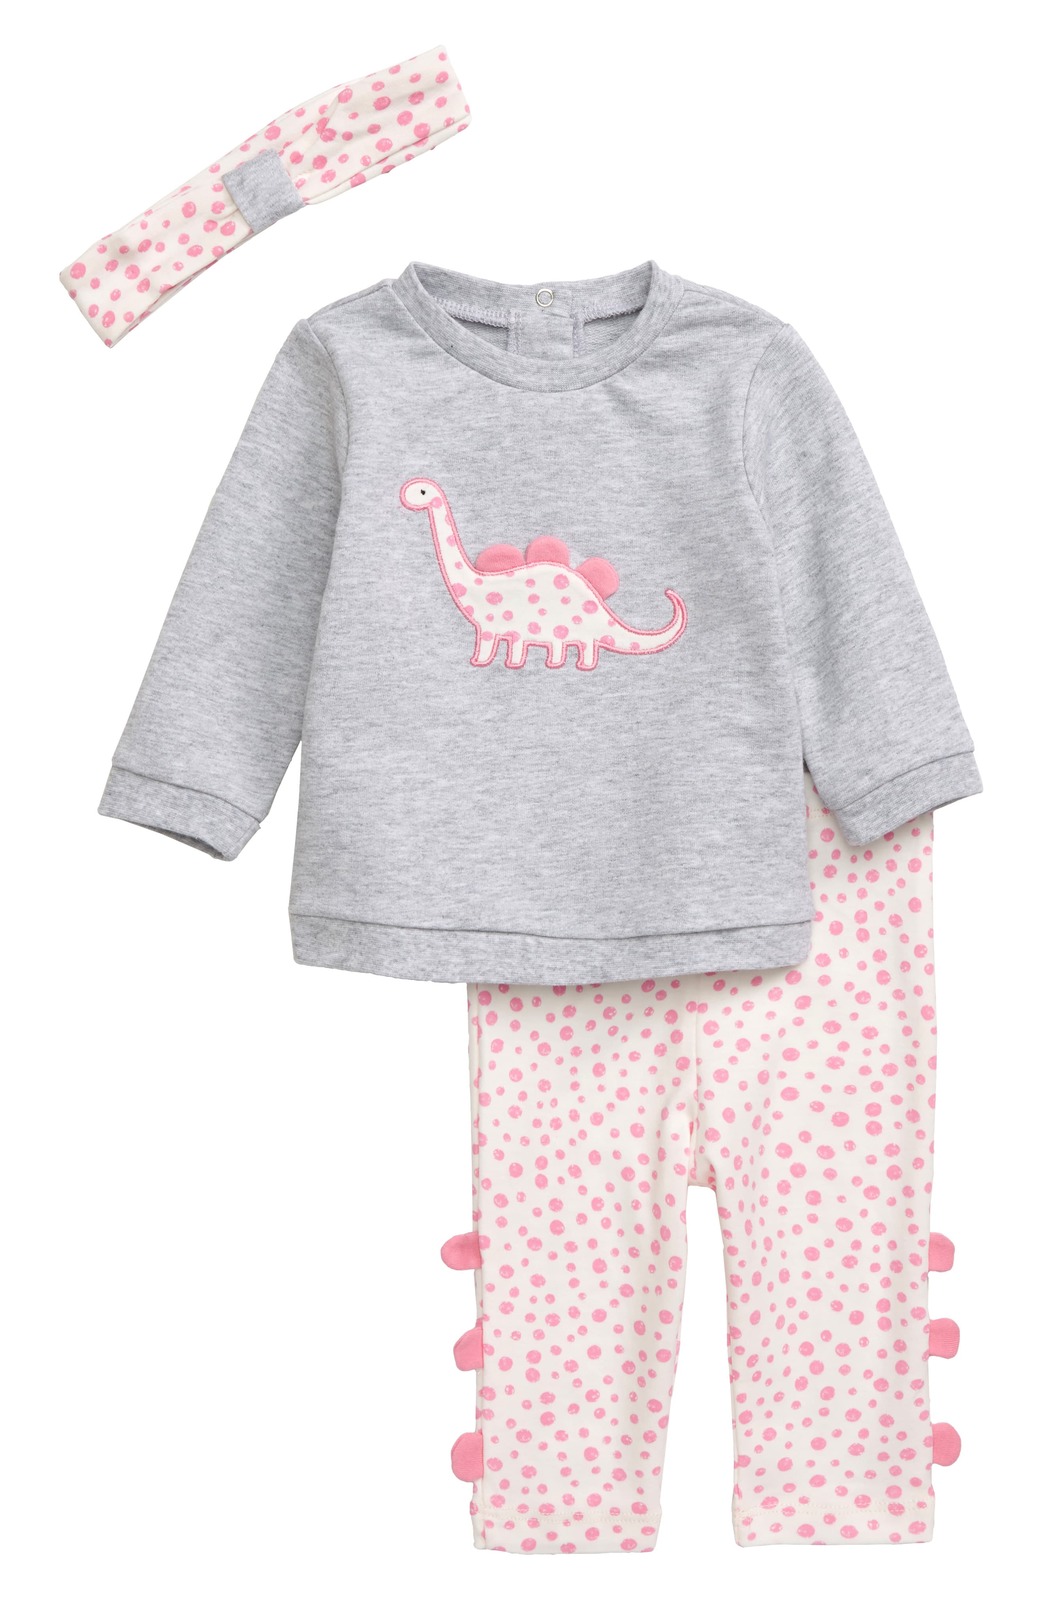 Primary image for Little Me Girls Dino Sweatshirt, Leggings and Headband Set, Size 6 Months